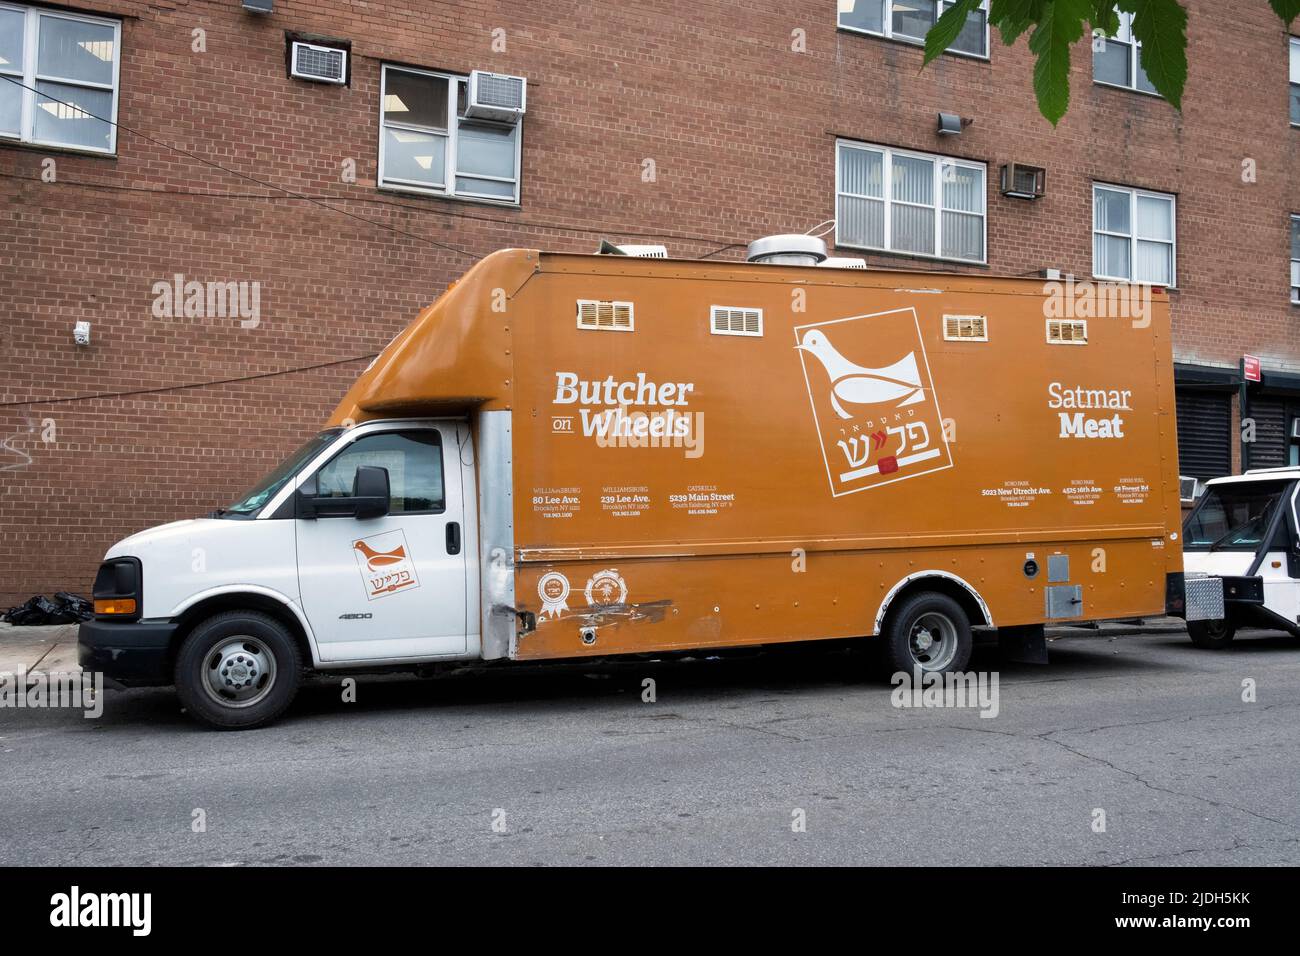 BUTCHER ON WhEELS. A delivery truck for the Glatt Kosher butcher, Satmar Meat with Yiddish & English writing. In Williamsburg, Brooklyn, NY. Stock Photo